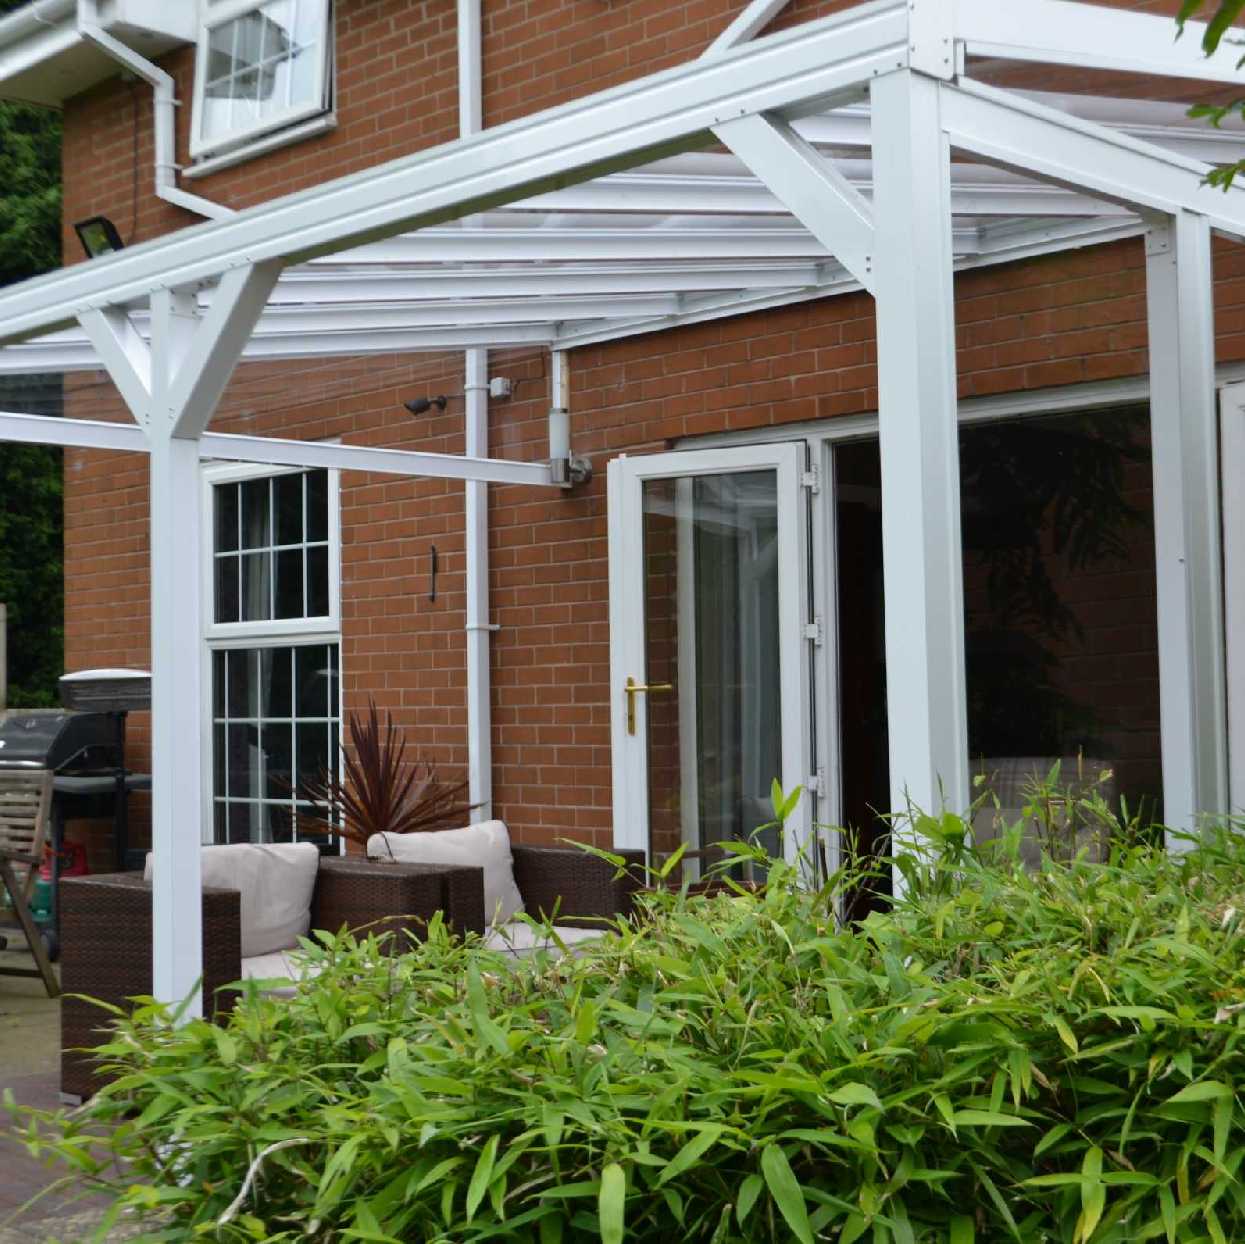 Omega Smart Lean-To Canopy, White with 6mm Glass Clear Plate Polycarbonate Glazing - 4.9m (W) x 1.5m (P), (3) Supporting Posts from Omega Build